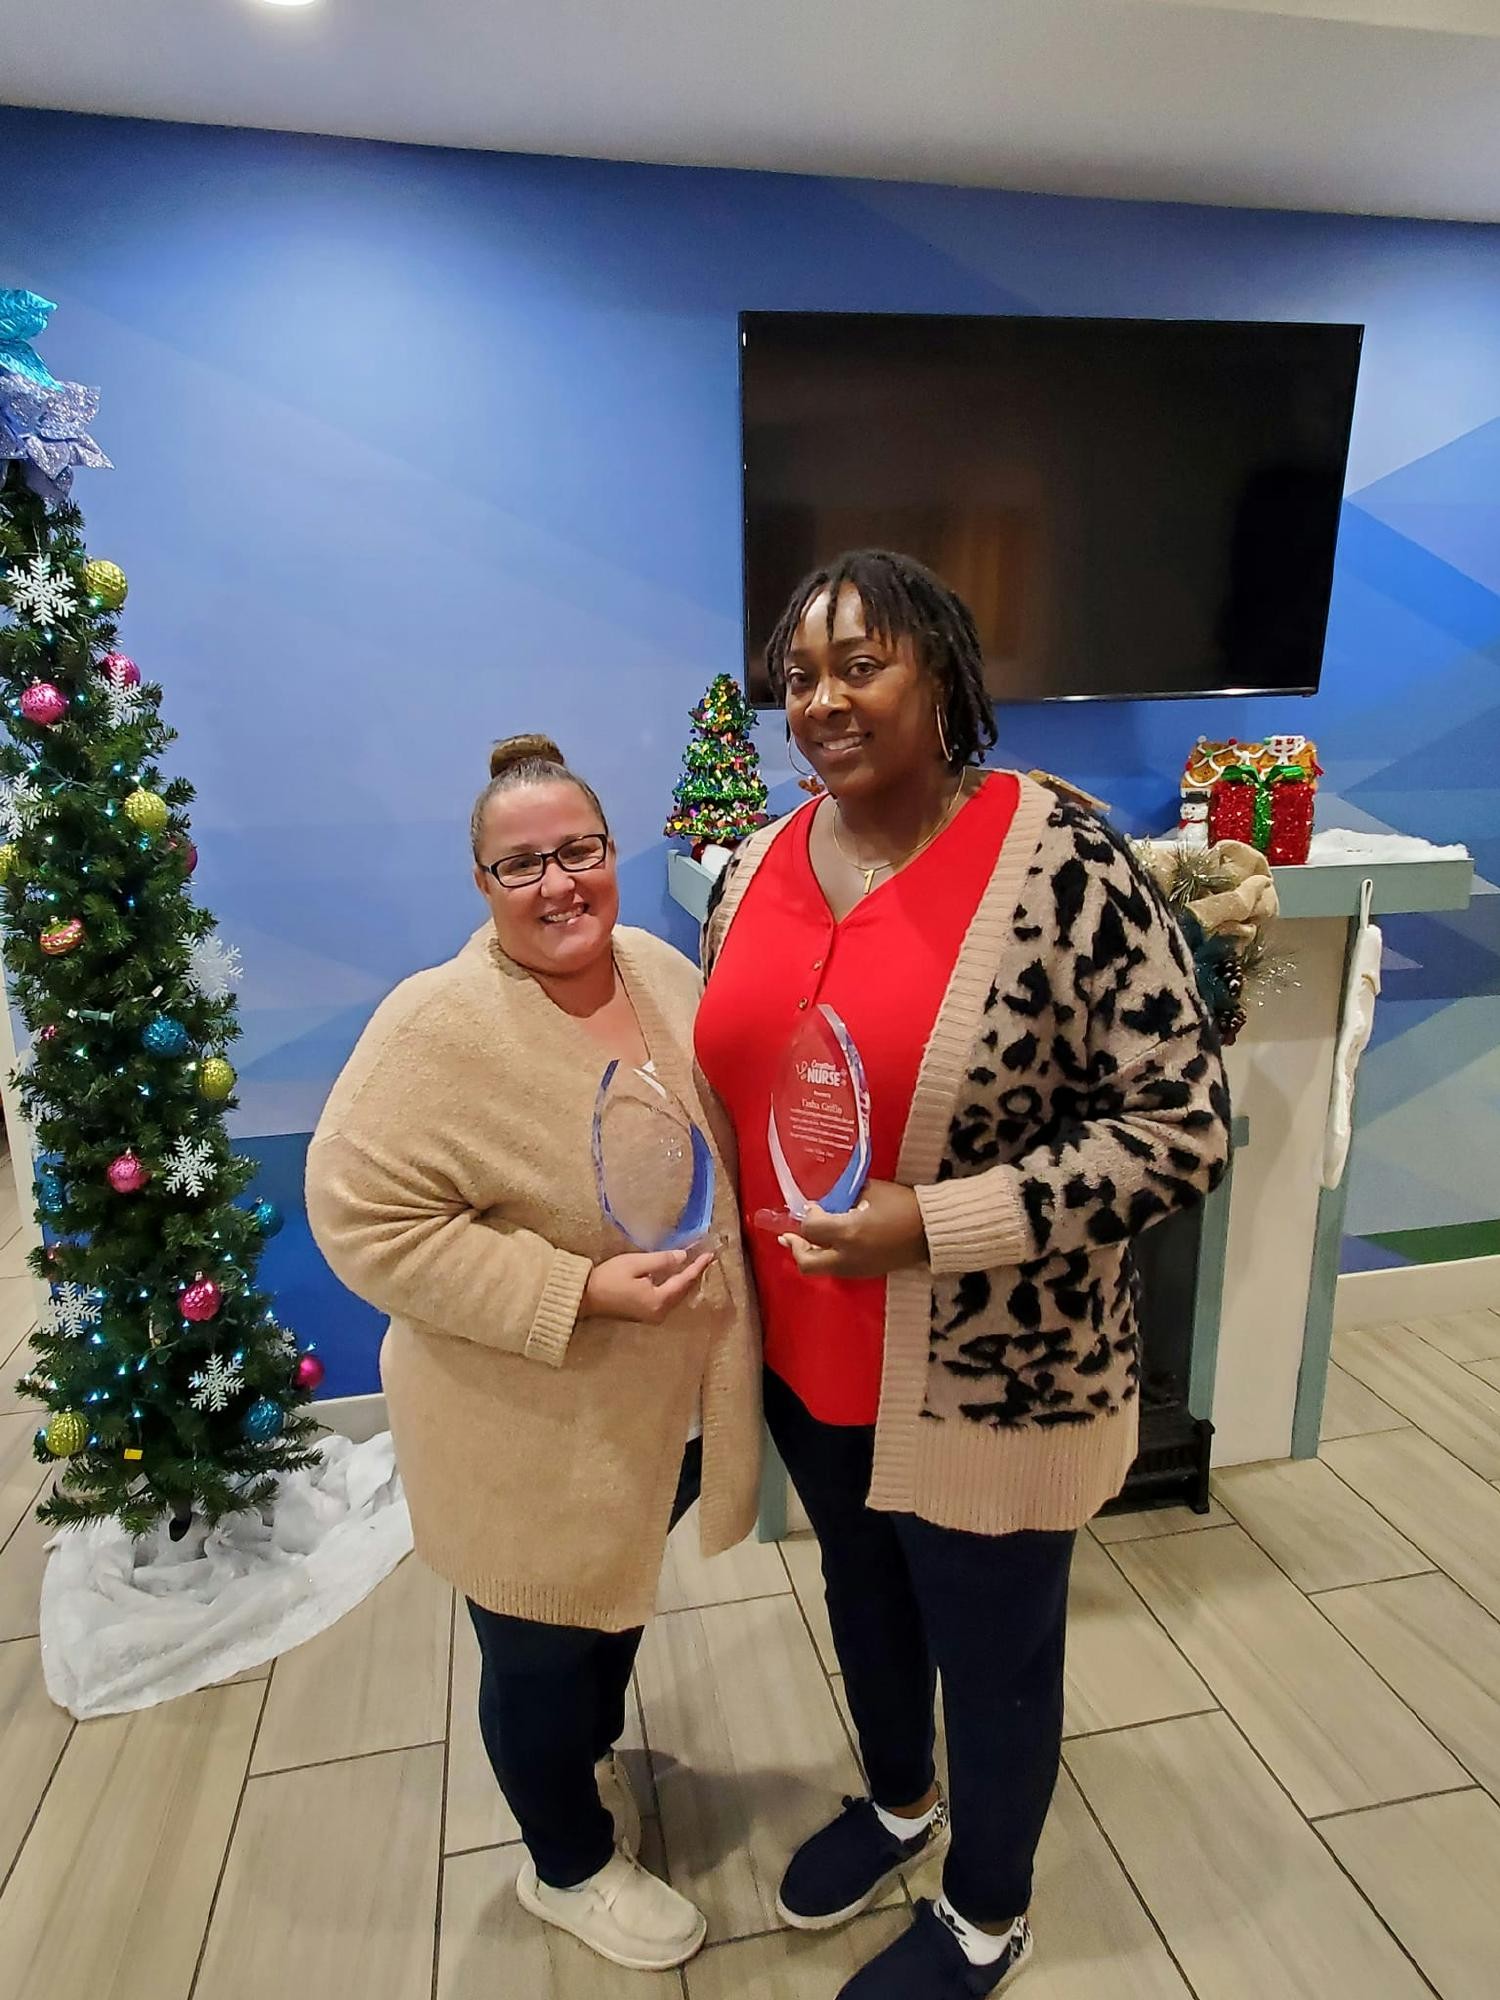 Employees who go above and beyond for our residents.